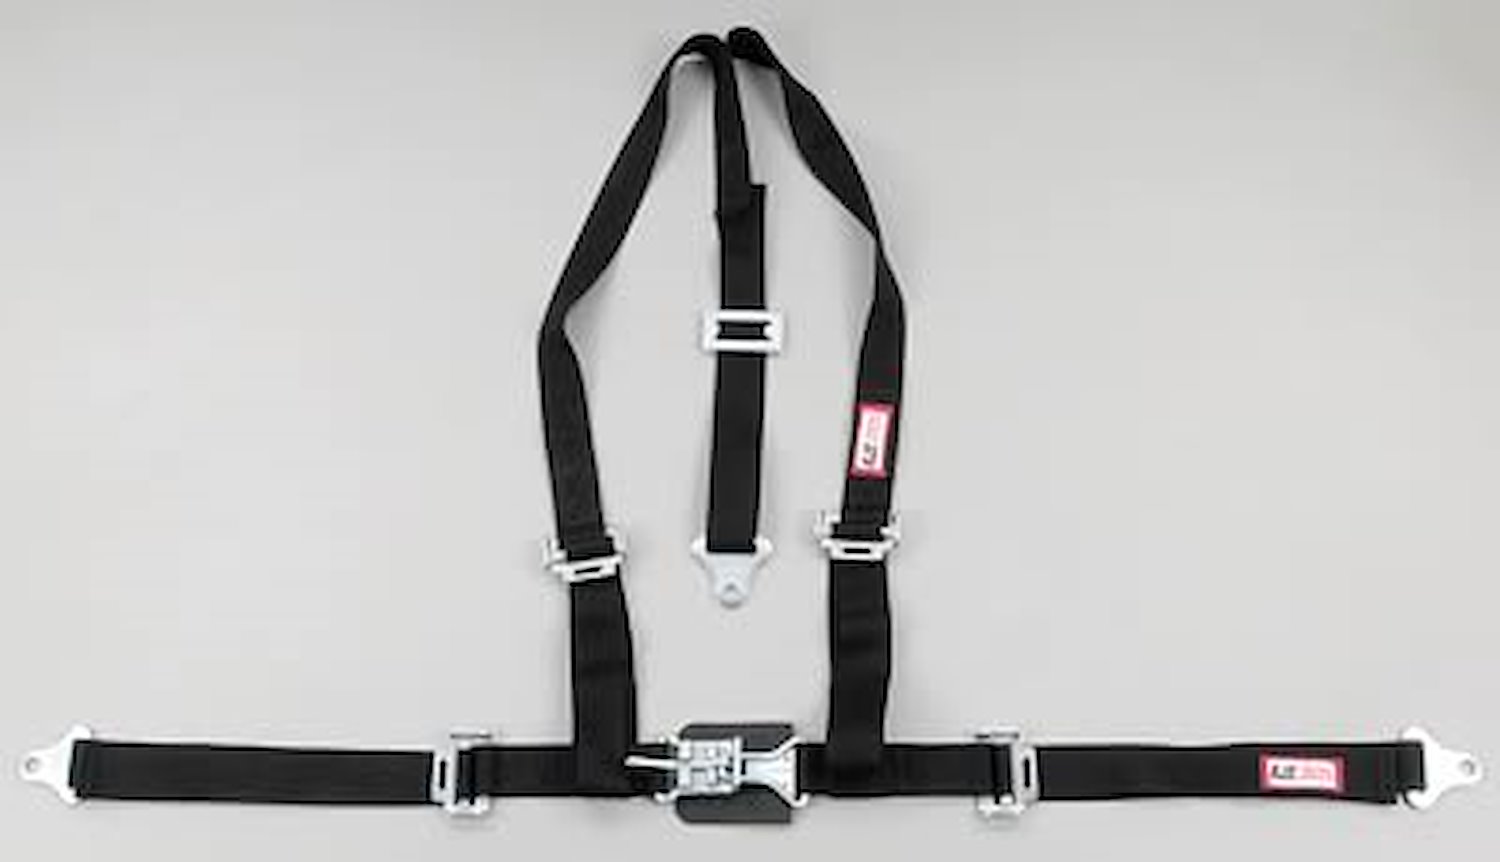 NON-SFI L&L HARNESS 3 PULL DOWN Lap Belt SEWN IN 2 Shoulder Harness V ROLL BAR Mount ALL WRAP ENDS RED